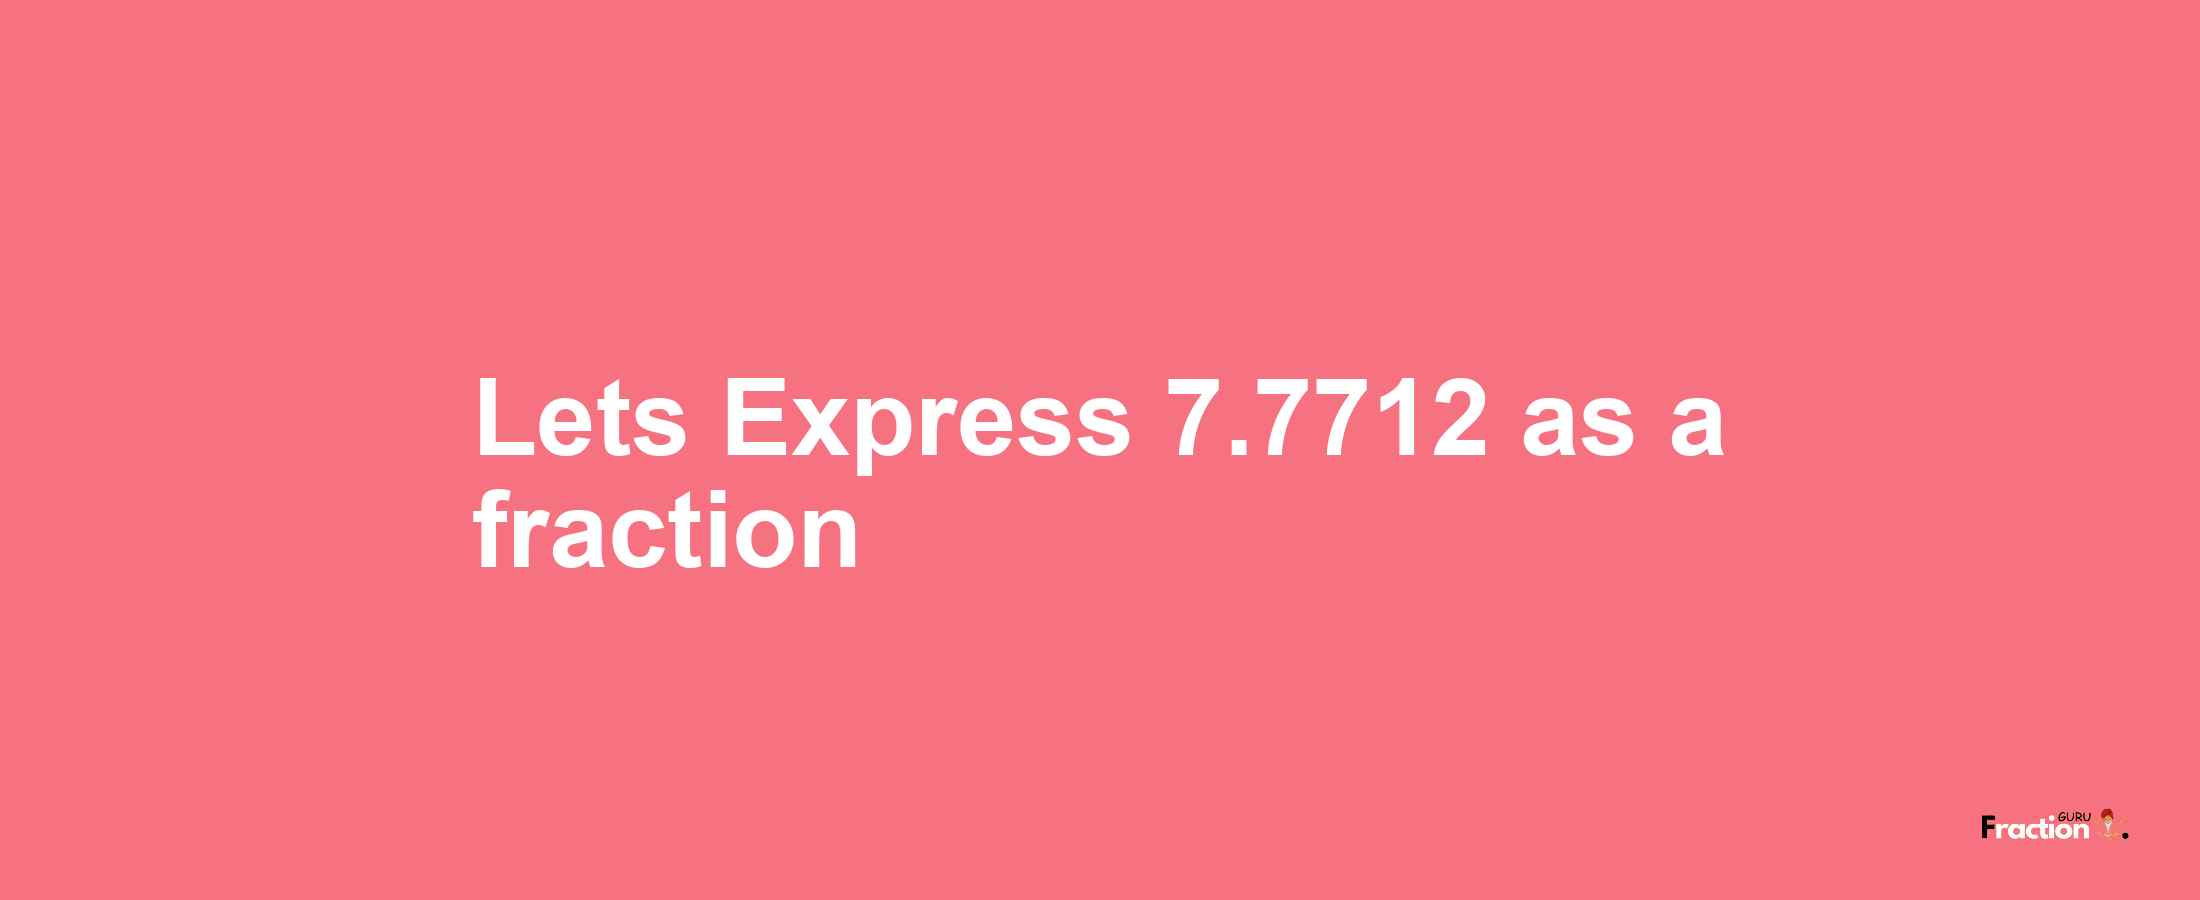 Lets Express 7.7712 as afraction